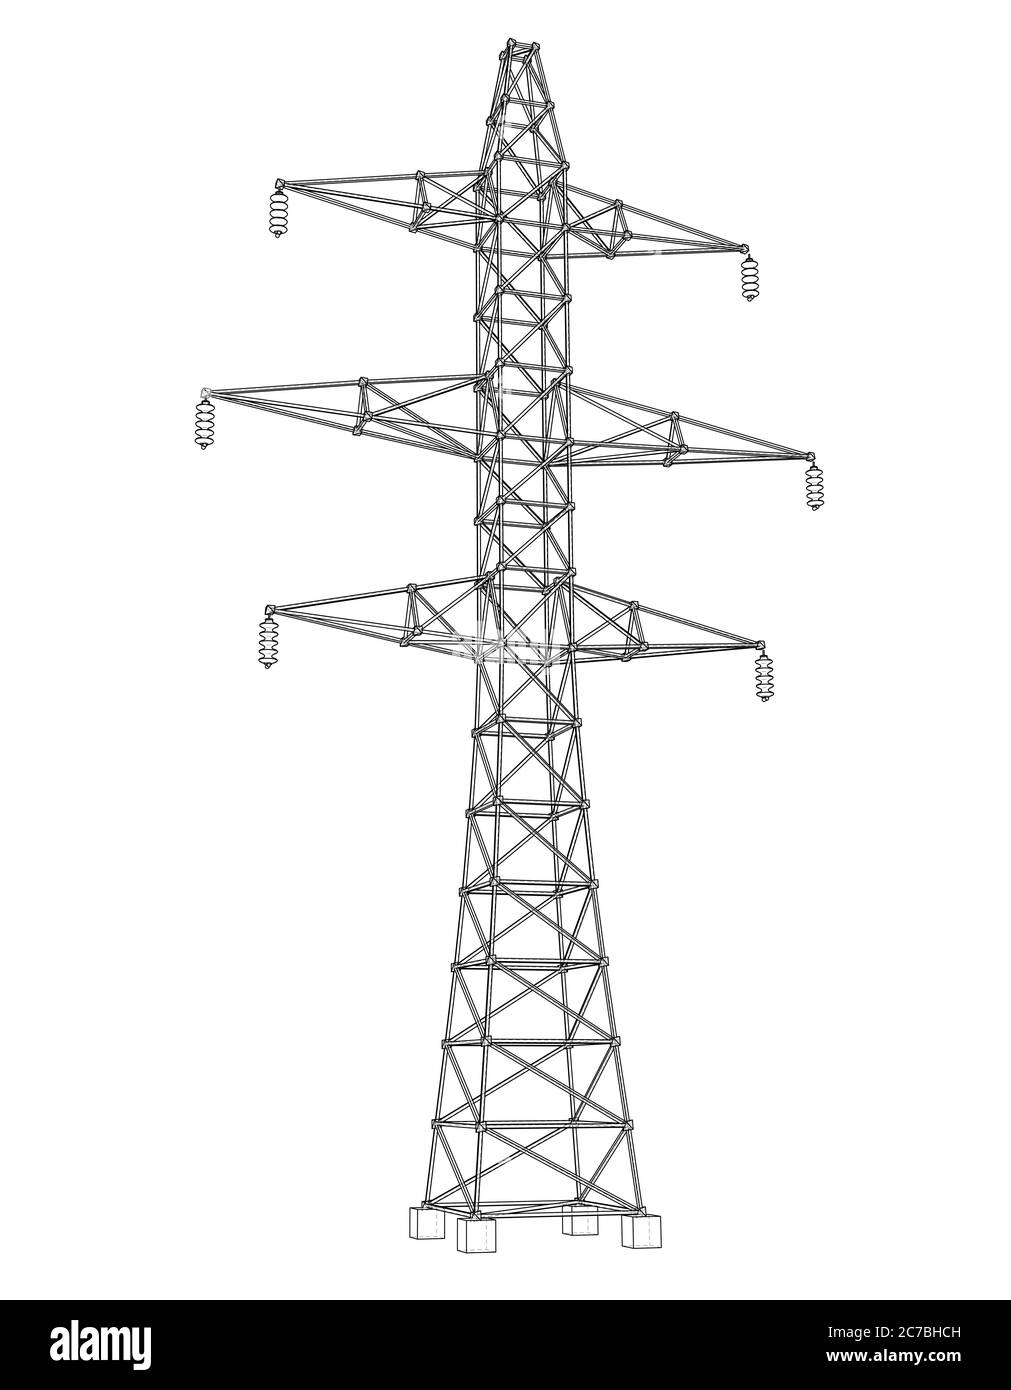 Electric pylon or electric tower concept Stock Photo